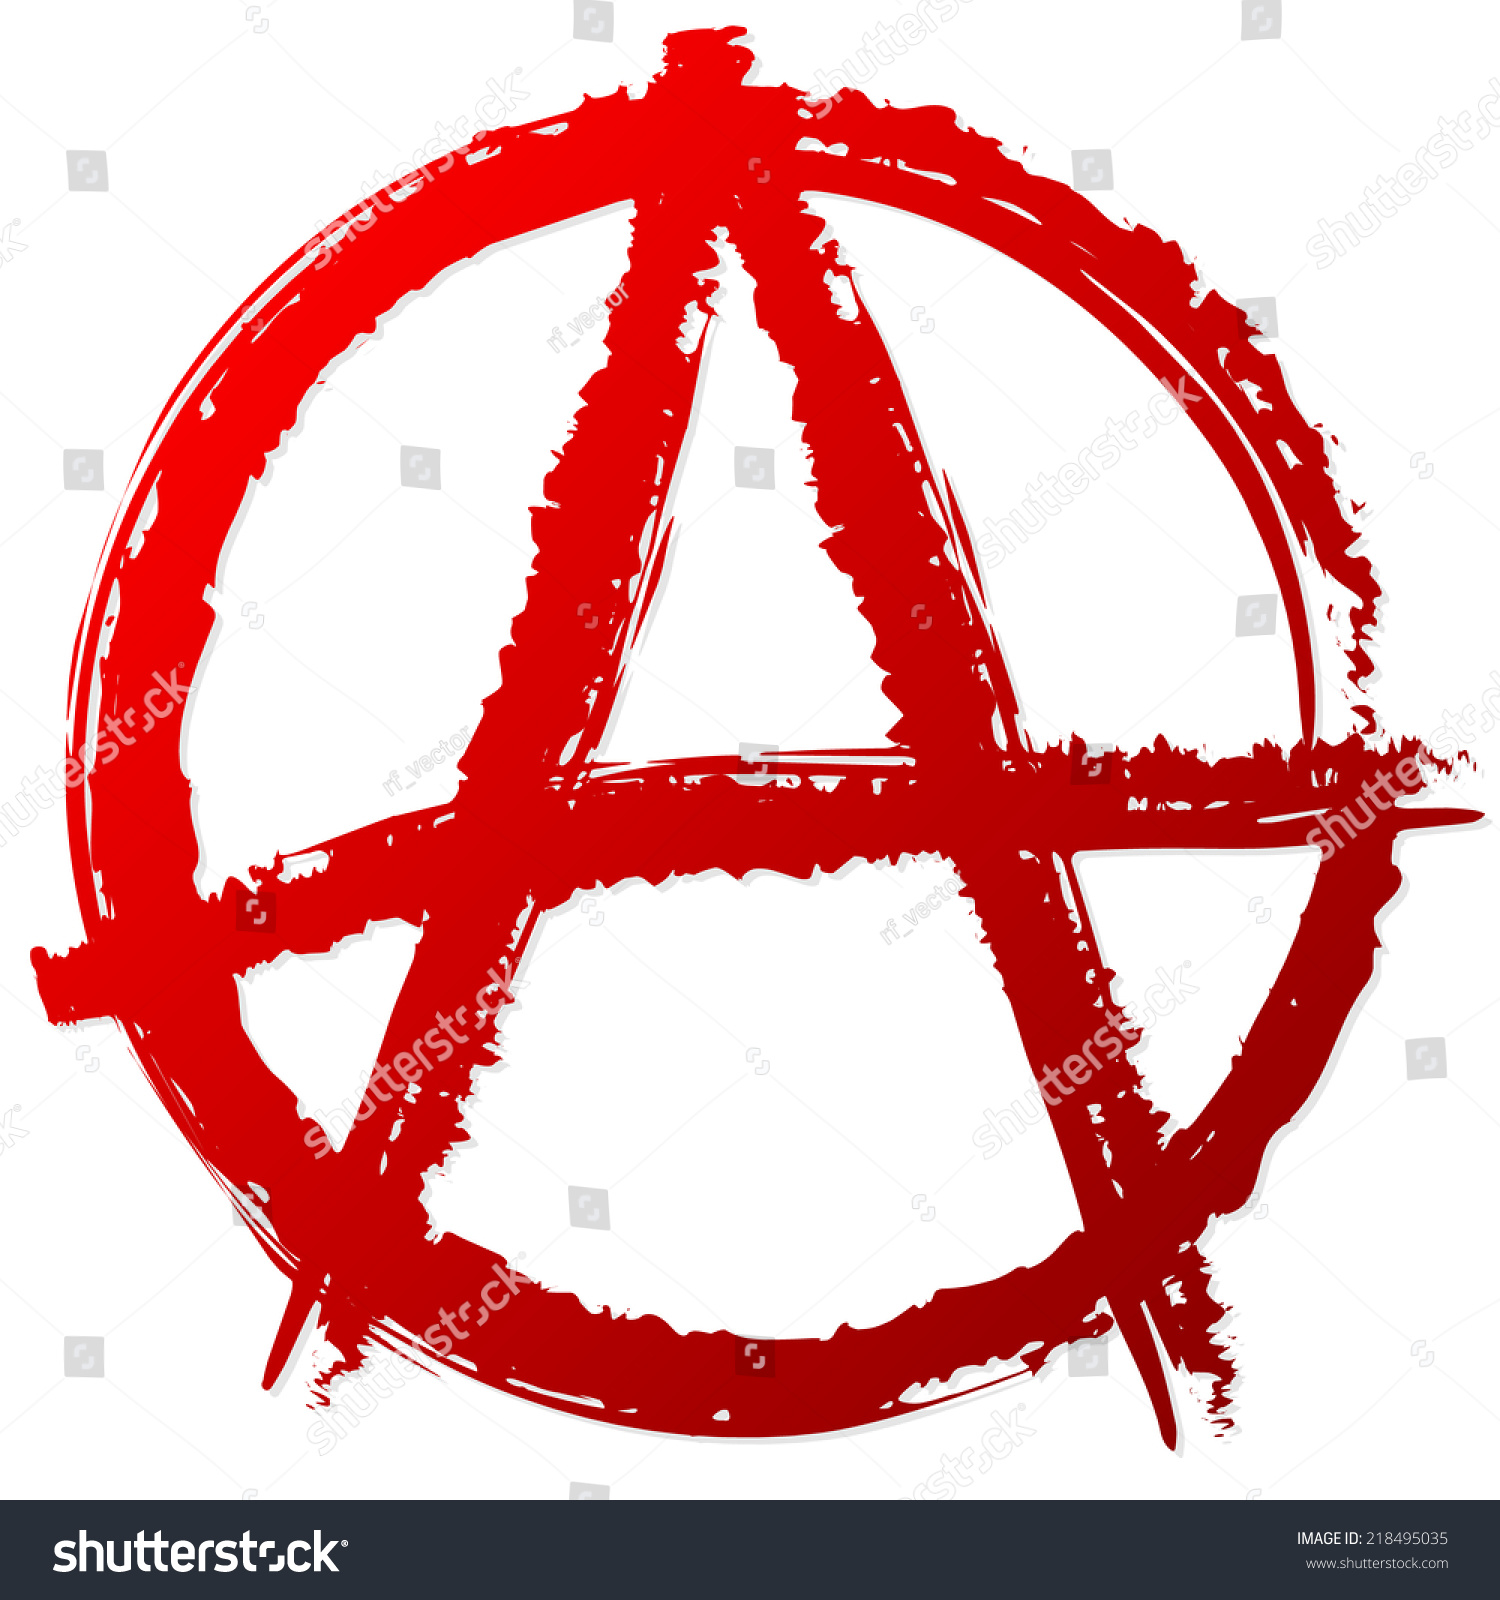 Painted Anarchy Symbol Stock Vector Illustration 218495035 : Shutterstock